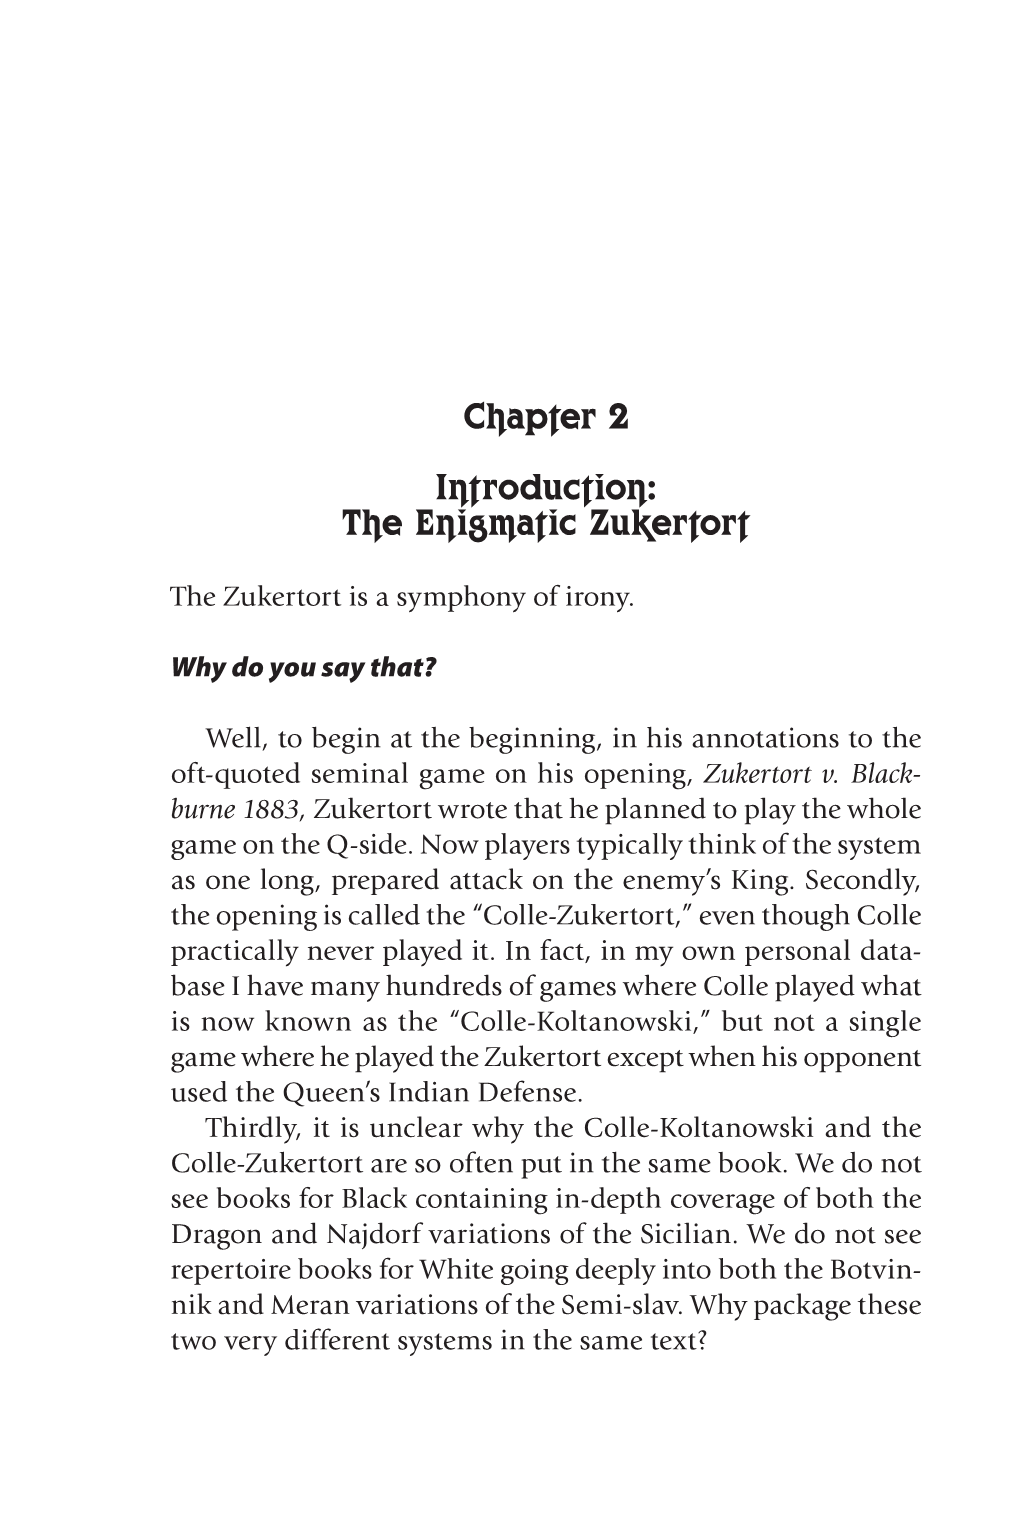 Chapter 2 Introduction: the Enigmatic Zukertort